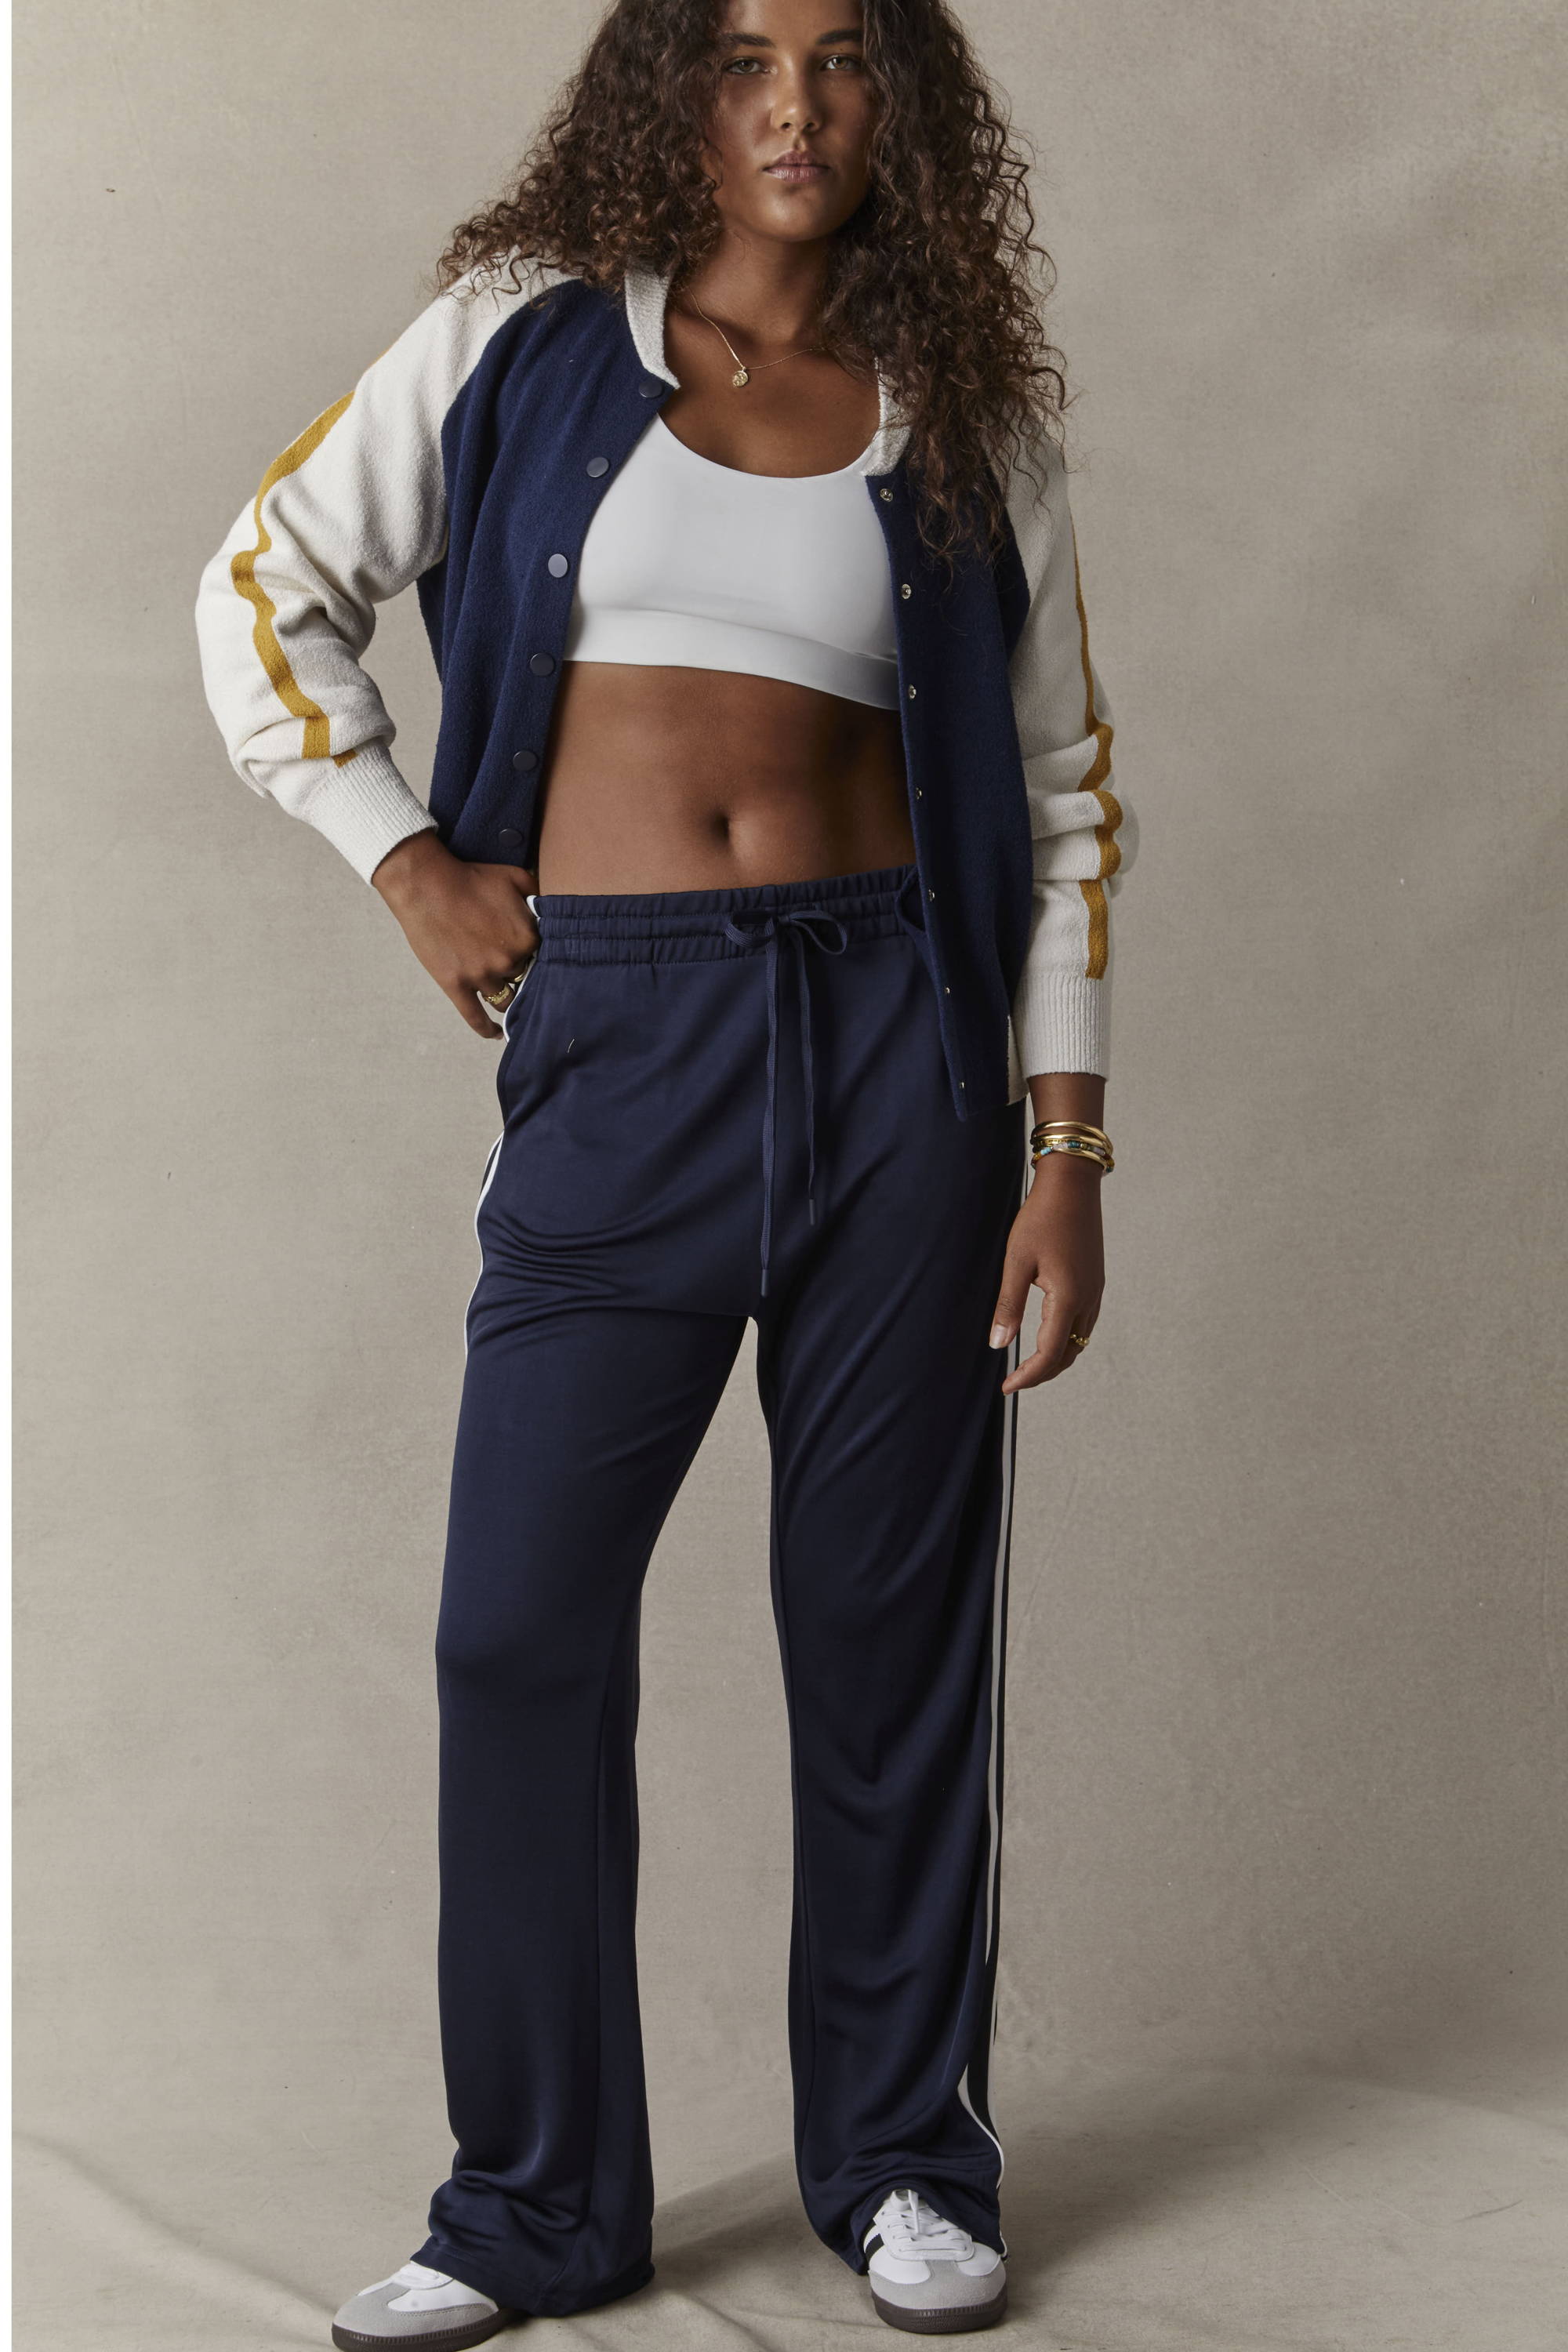 THE UPSIDE navy Celeste Pant worn with the navy Club Hallie Knit Bomber and white Peached Jade Bra.